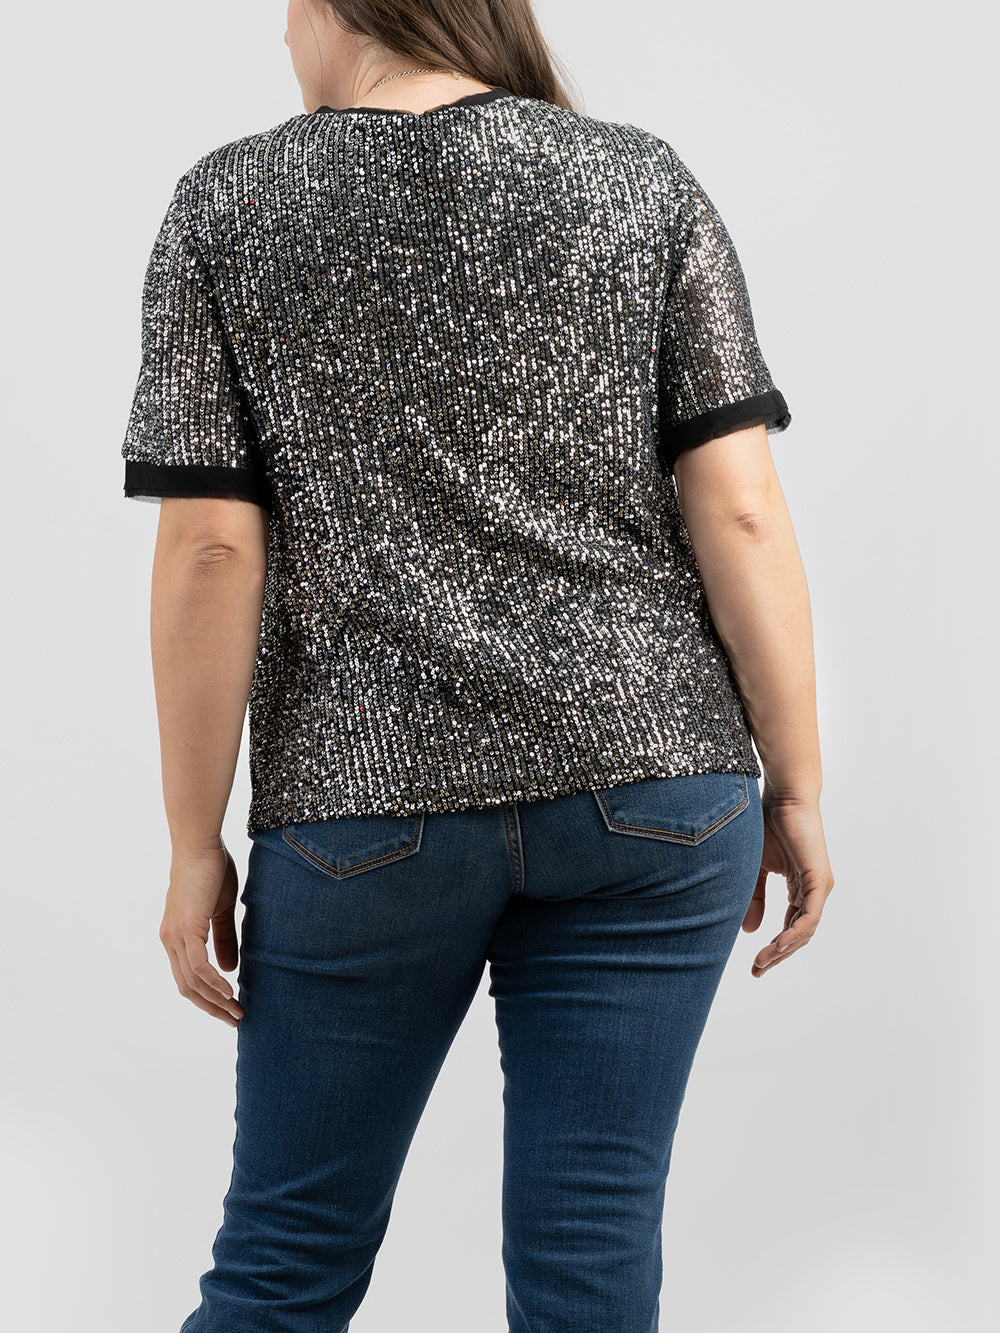 Plus Size Women Sequin Layer Decoration Short Sleeve Top - Cowgirl Wear